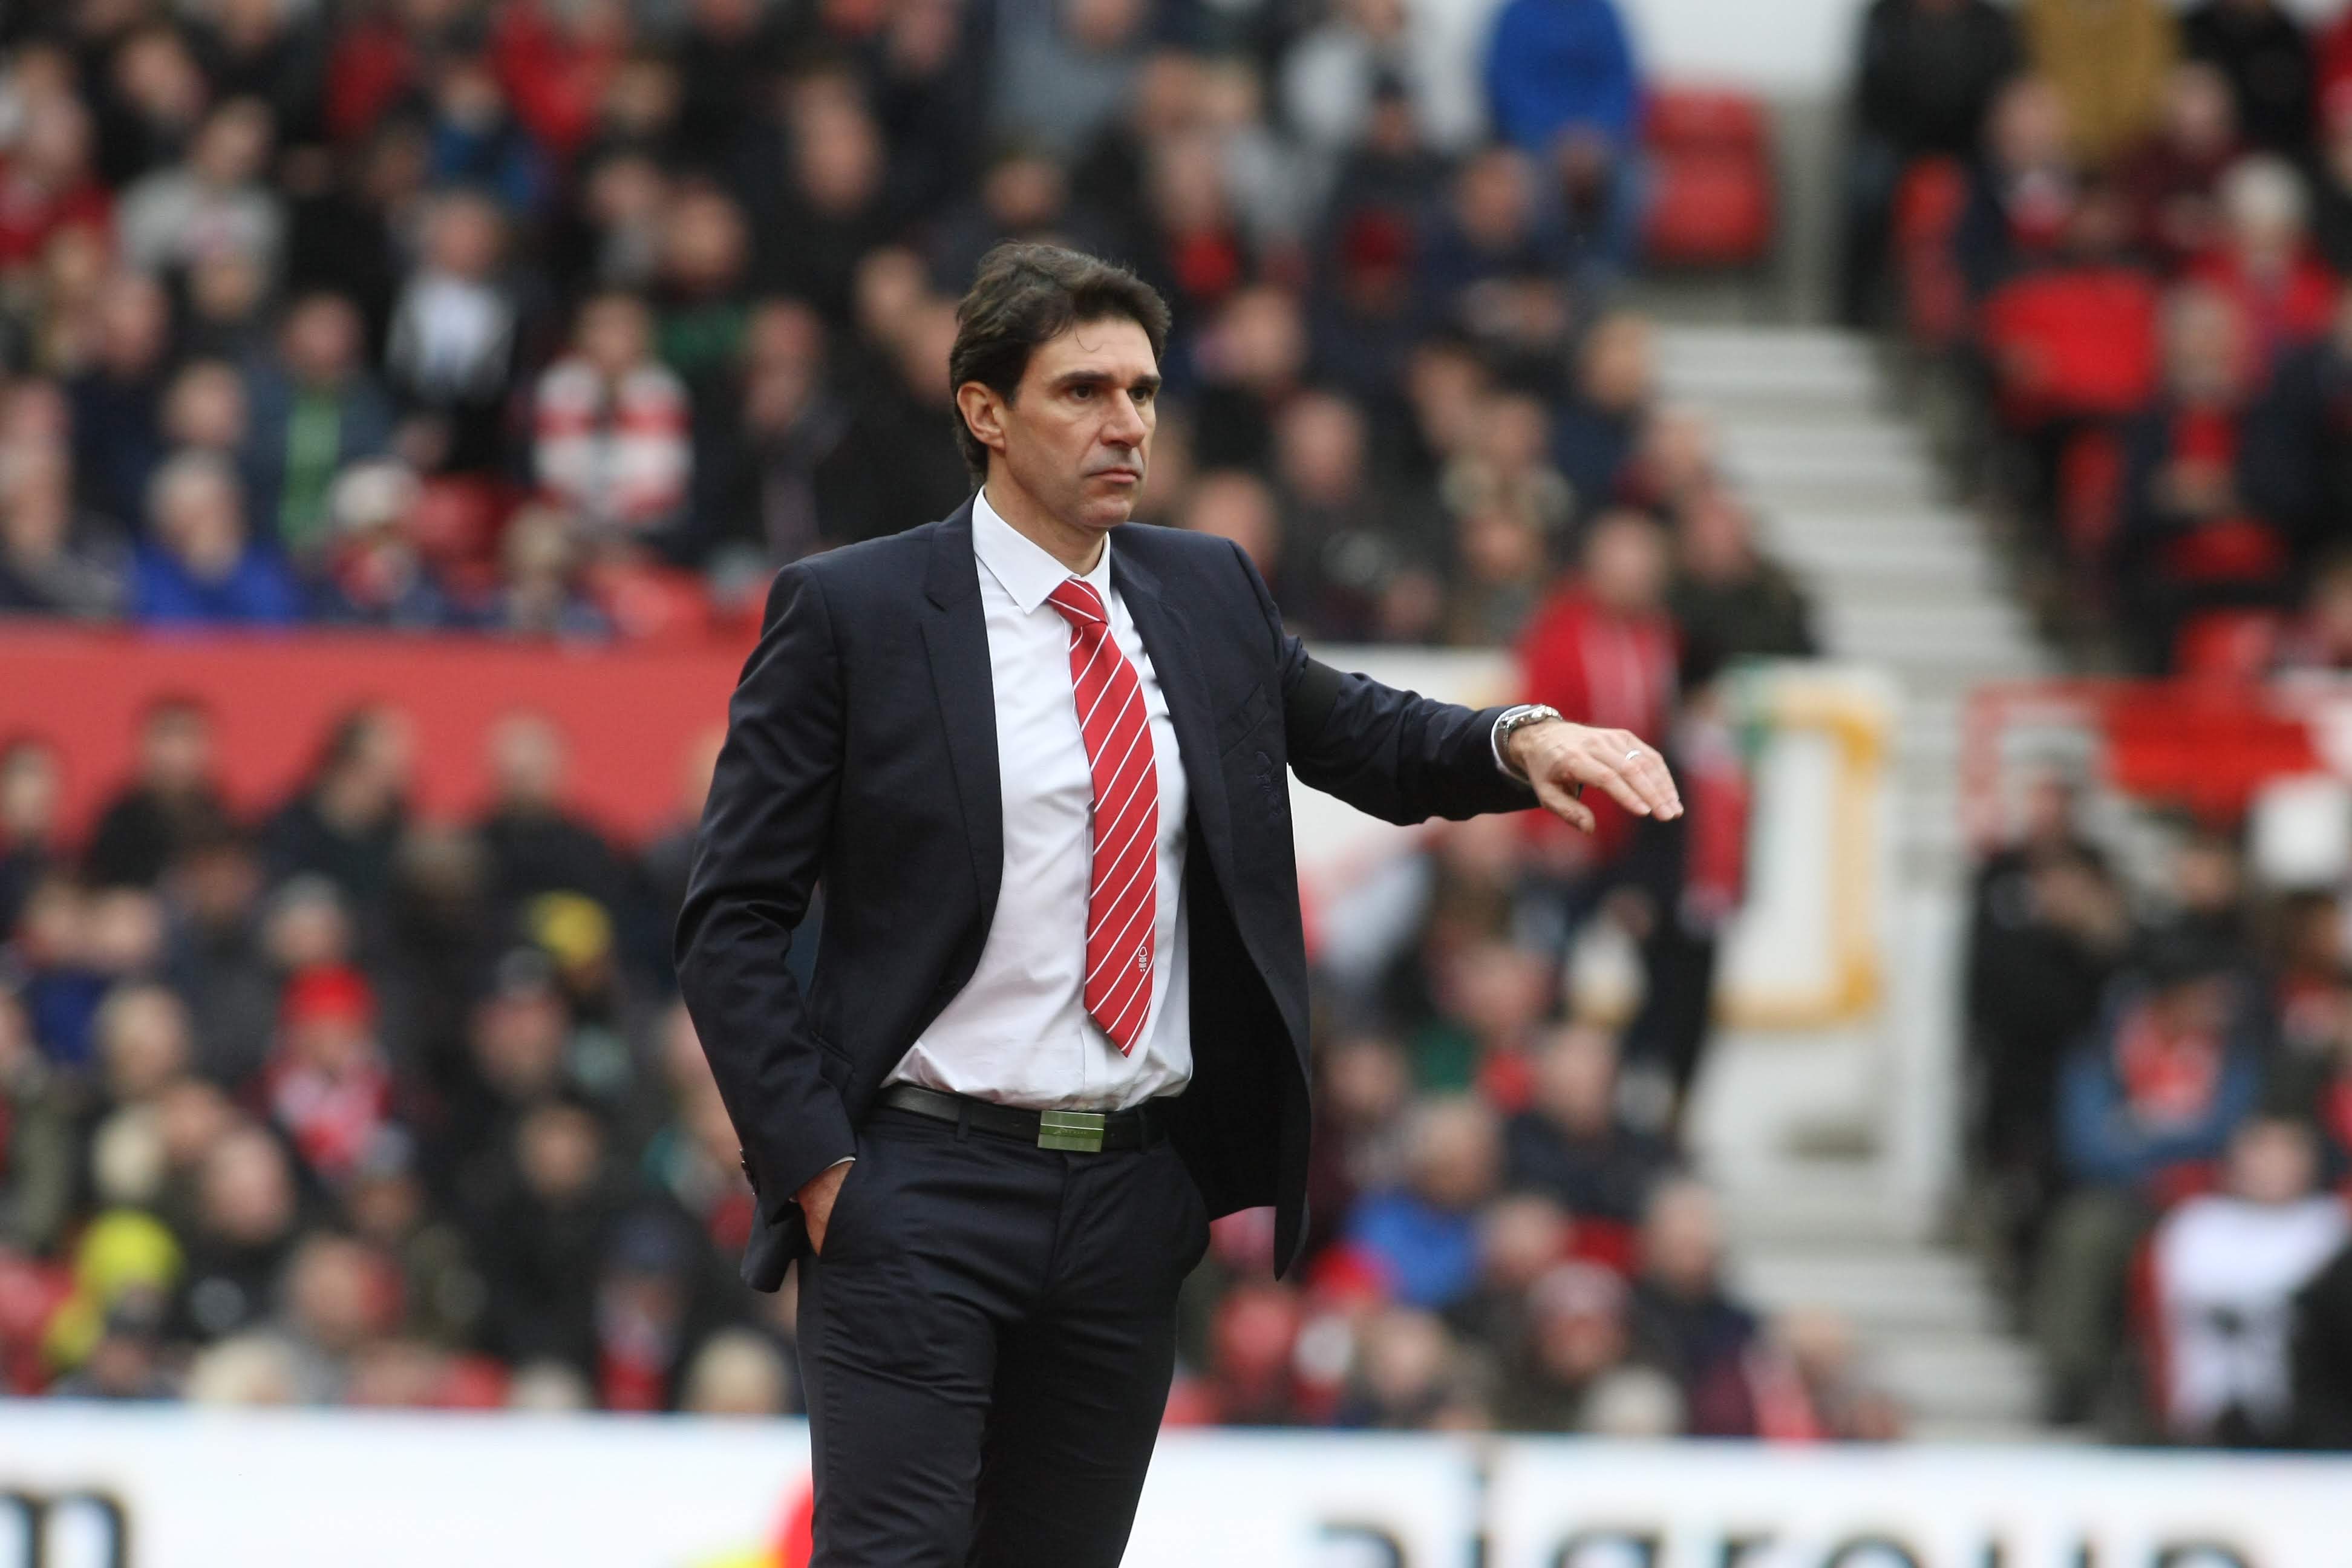 Karanka shares his thoughts on football in interview with Goal: “Style? A lot is said about it, but winning is ultimately the most important thing”